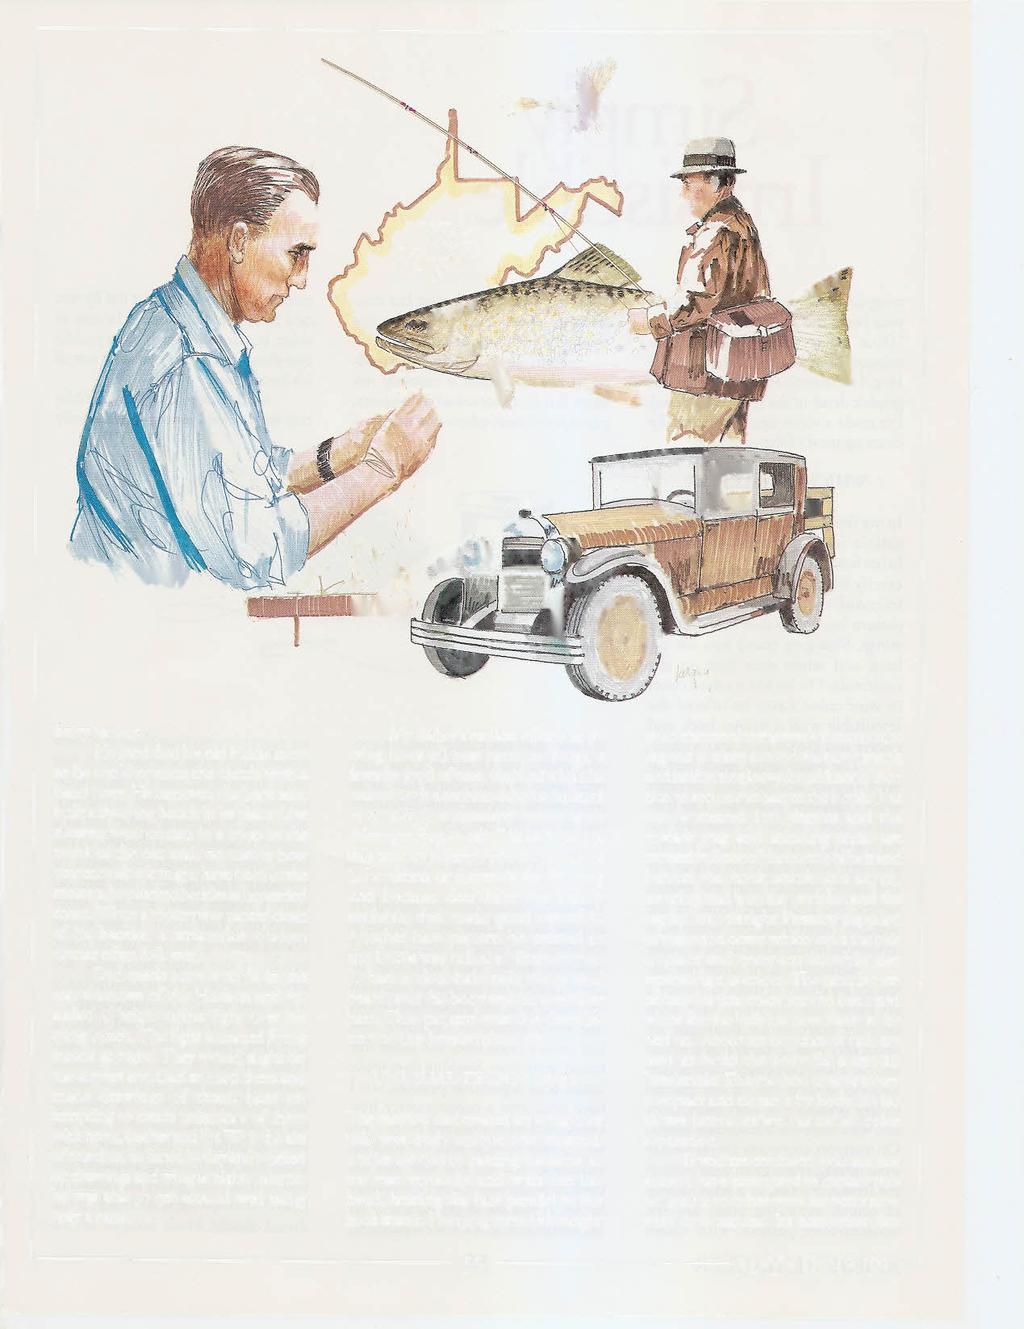 finny variety. He modified his old Hudson car so he could operate the clutch with a hand lever. He removed the back seat, built a fly-tying bench in its place.